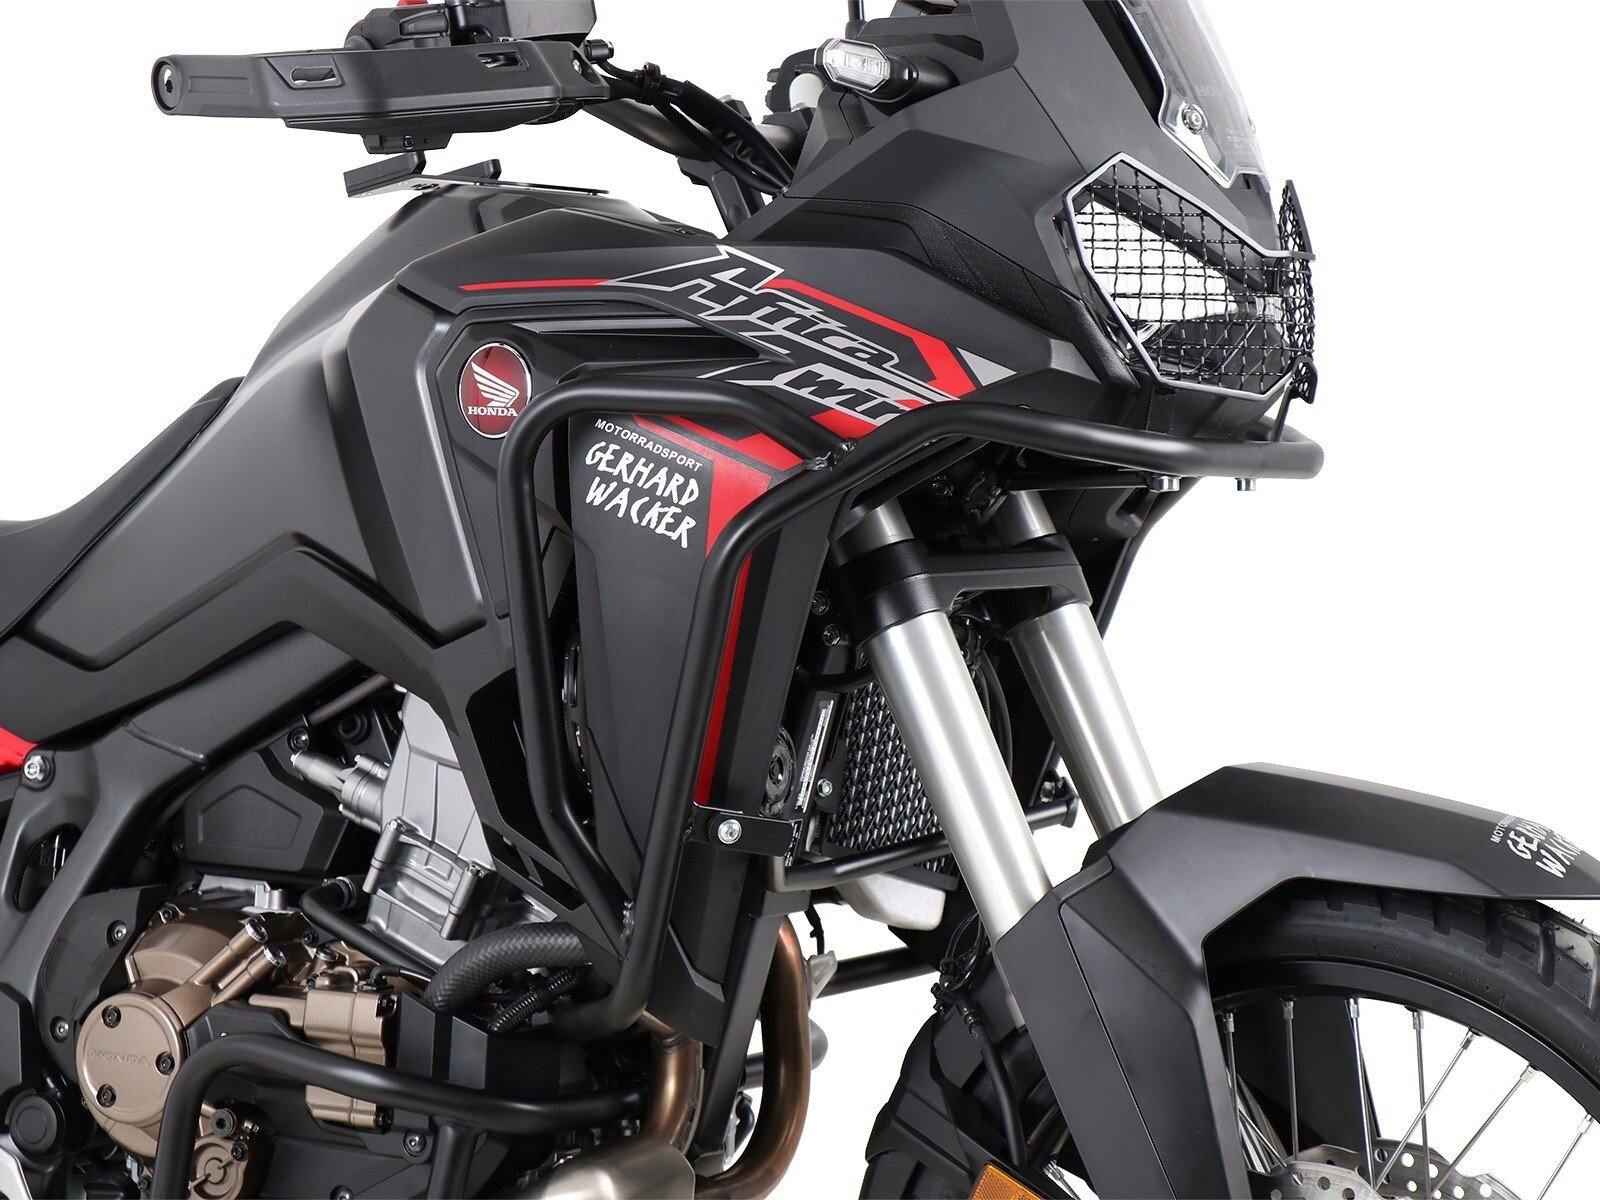 Hepco Upper Engine/Tank Protection Honda CRF 1100 L Africa Twin 2019- Black